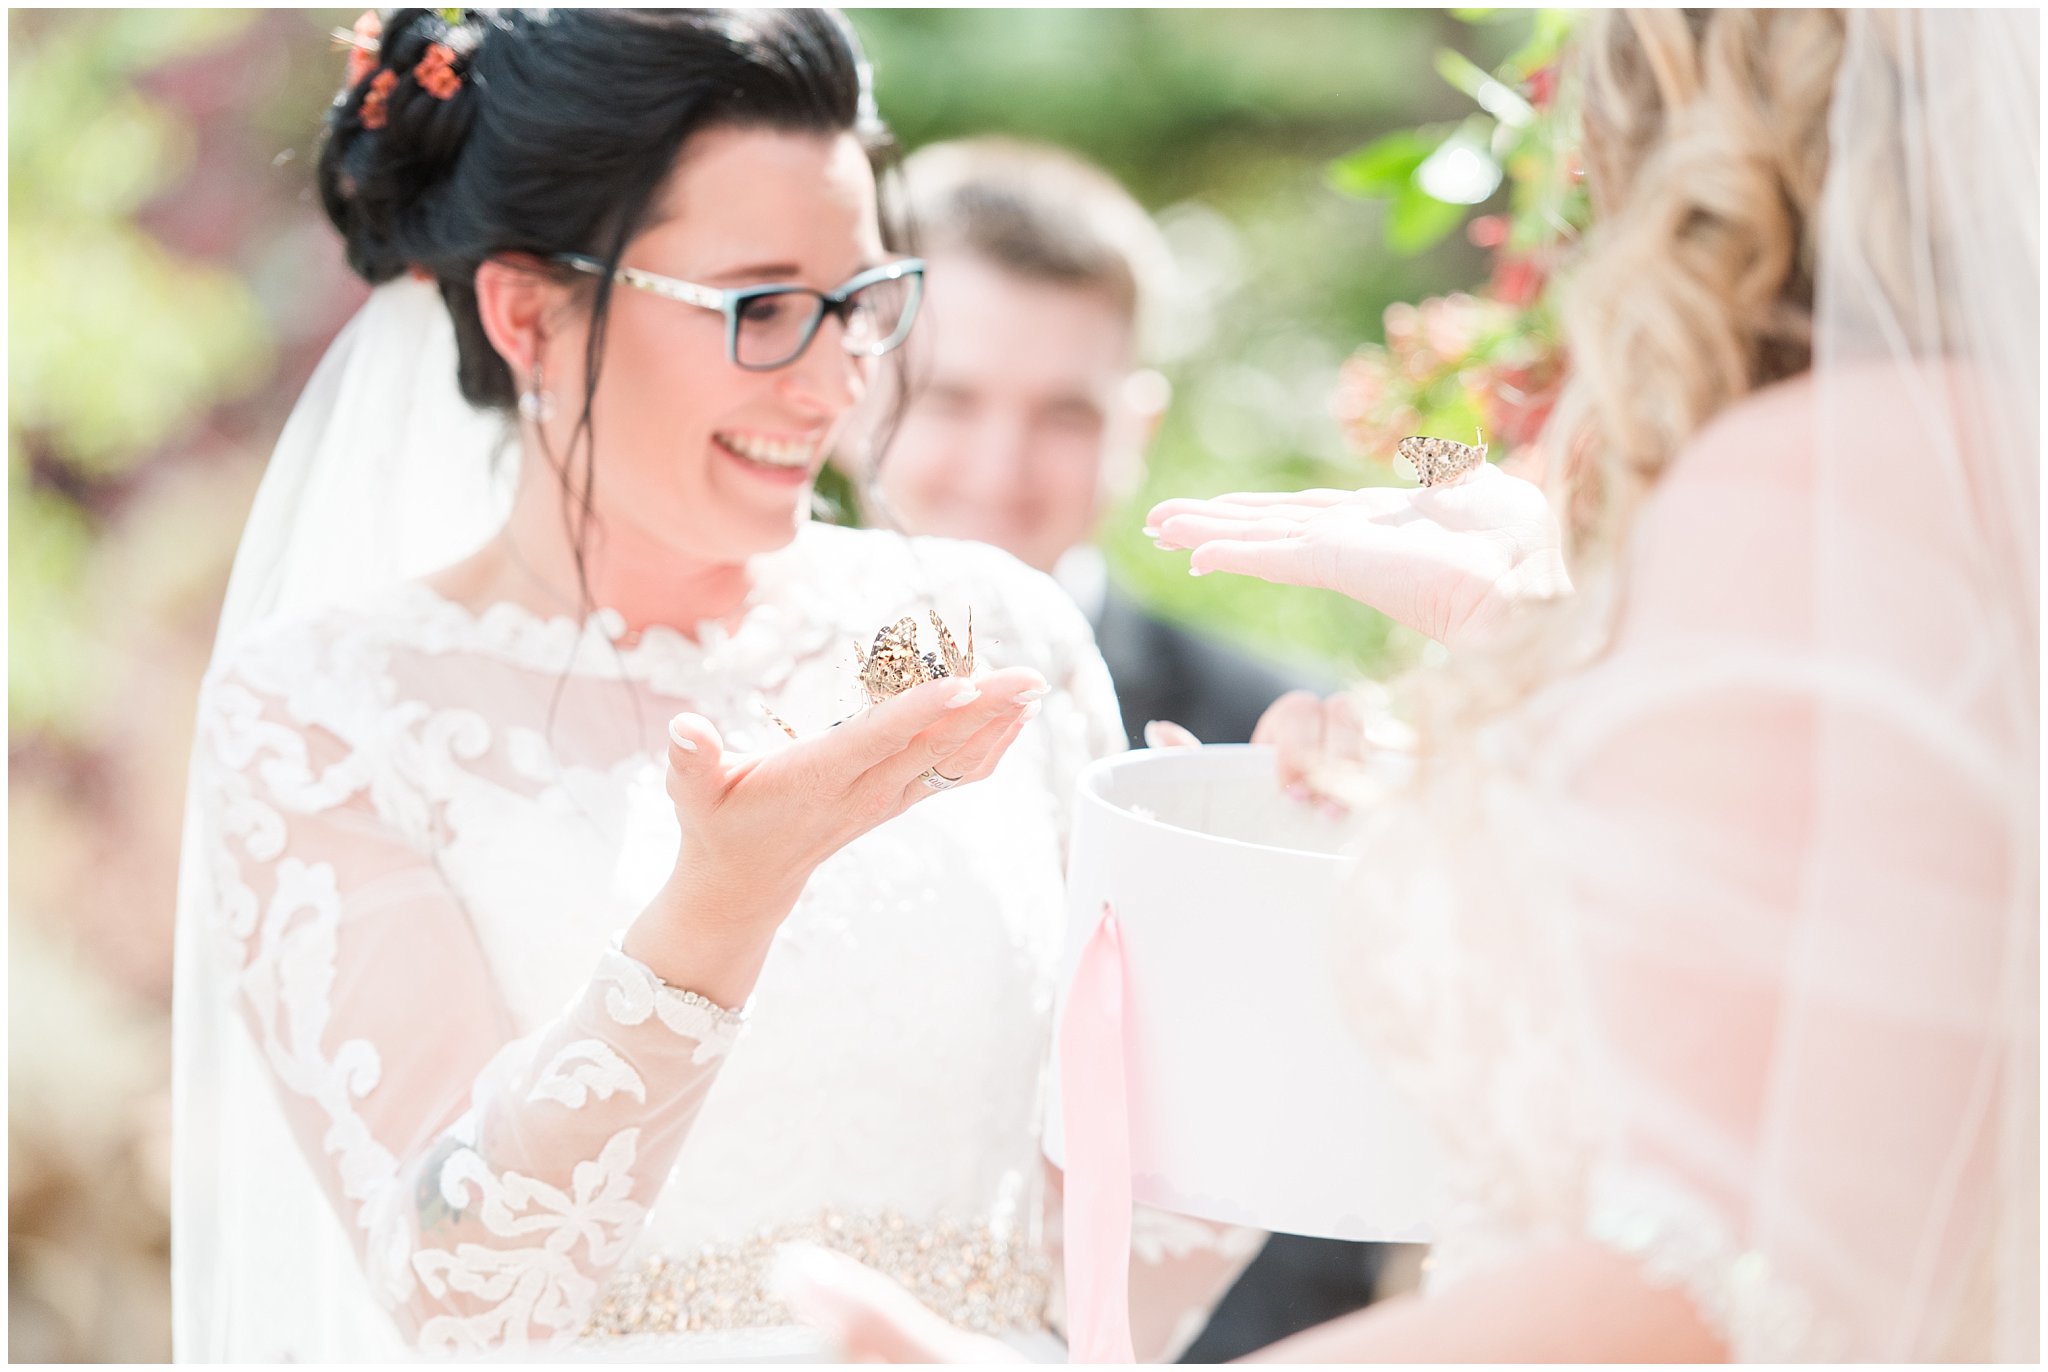 Butterfly ceremony release | Butterfly wedding with sunset colors | Park City Wedding at the Hyatt Centric | Jessie and Dallin Photography